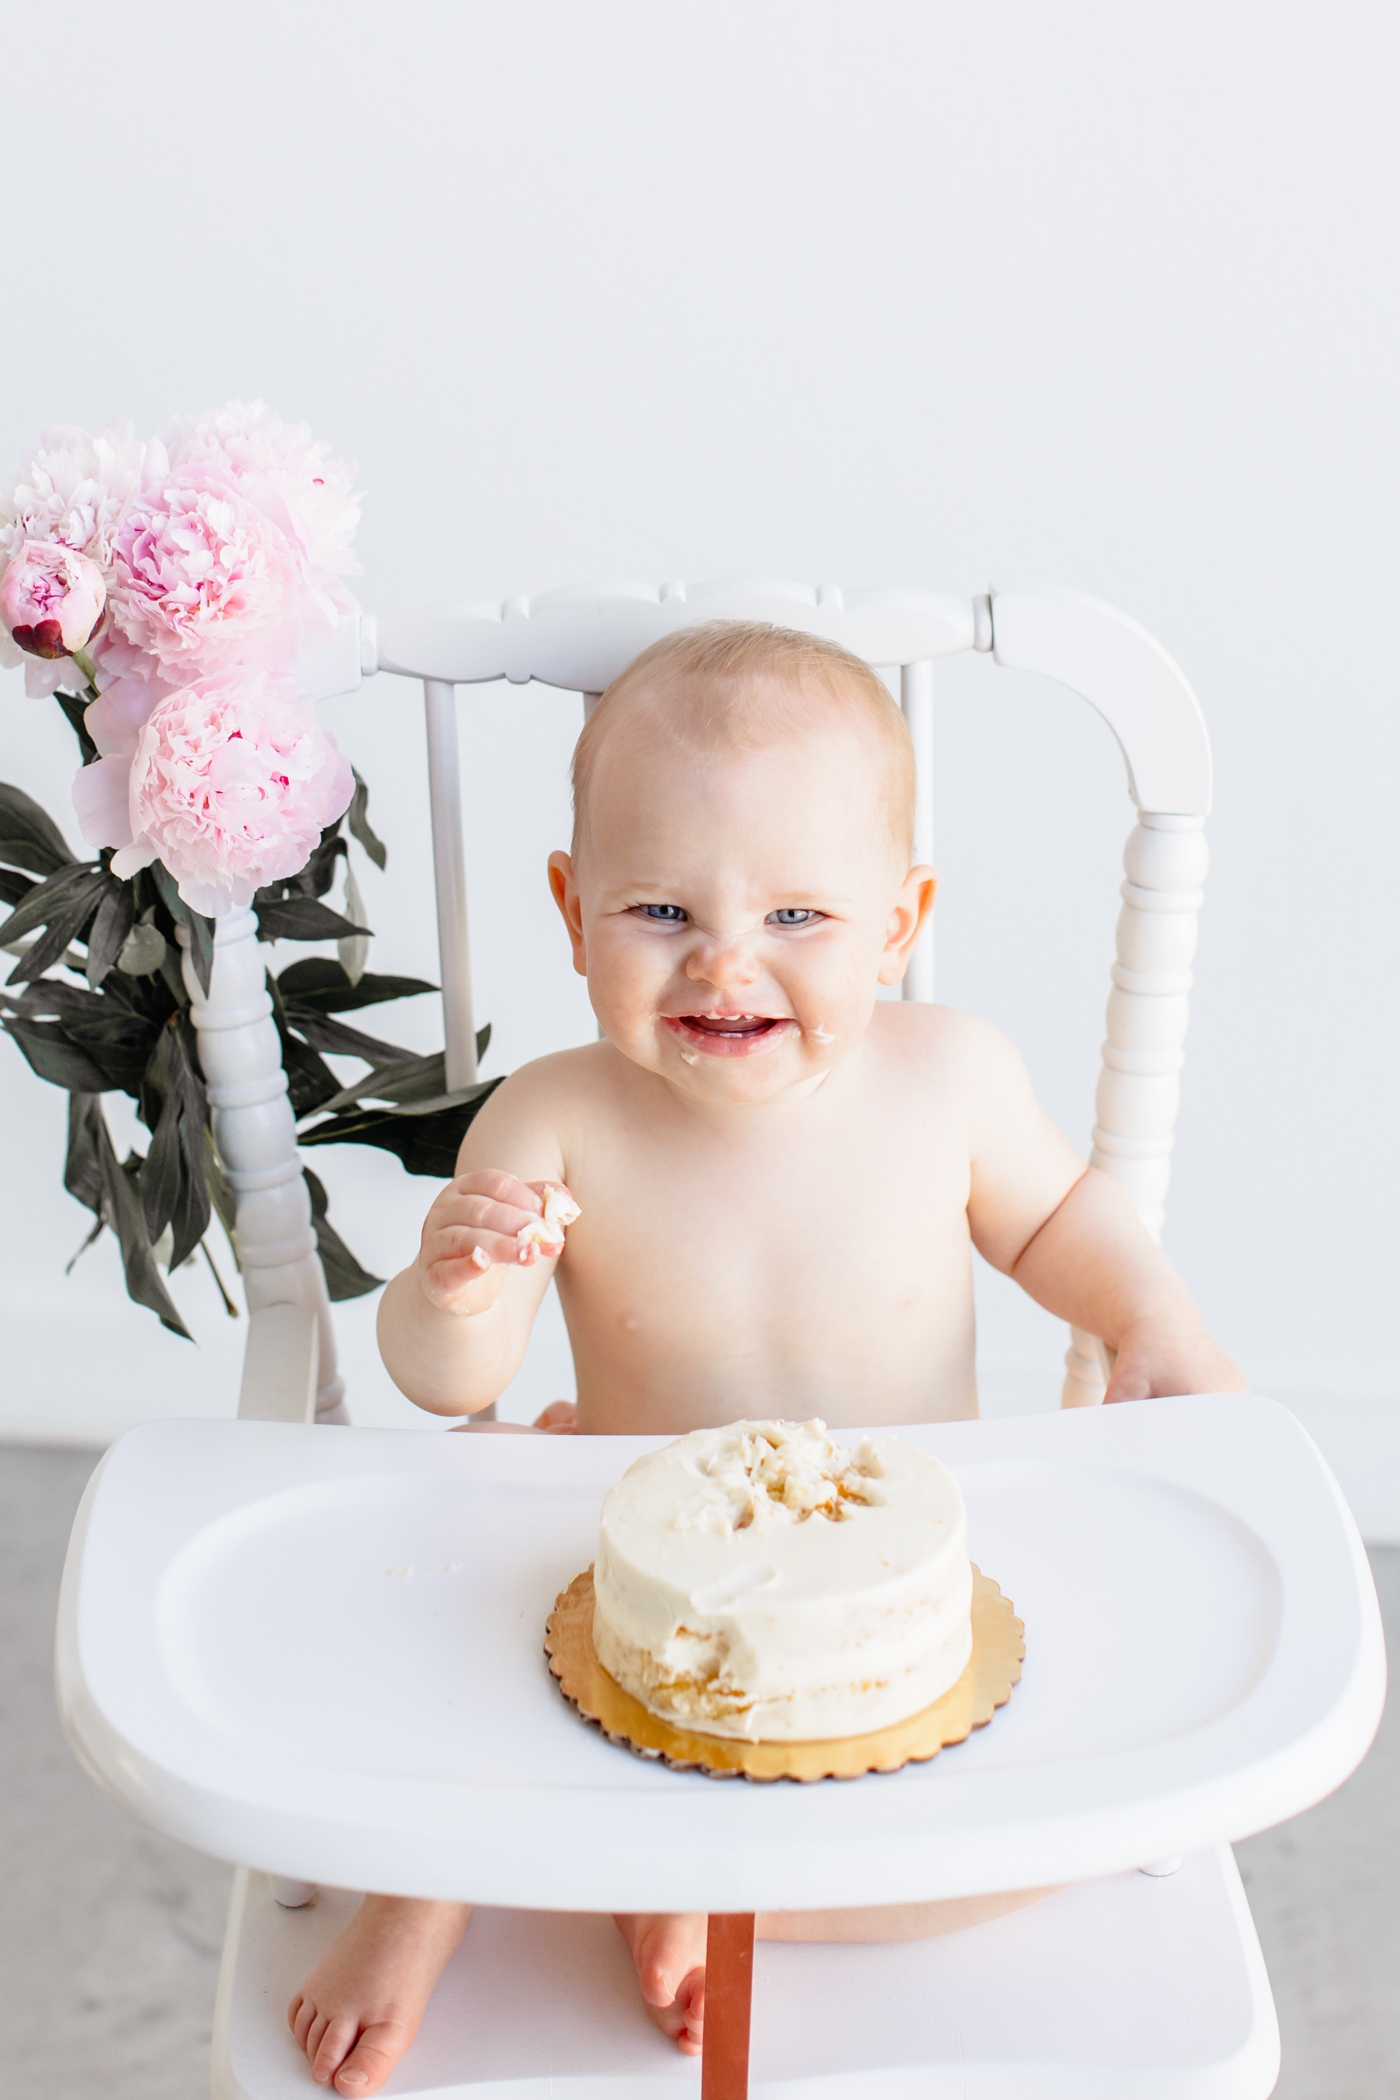 Big smile from toddler during her first birthday cake smash session in Austin. Photo by Sana Ahmed Photography.